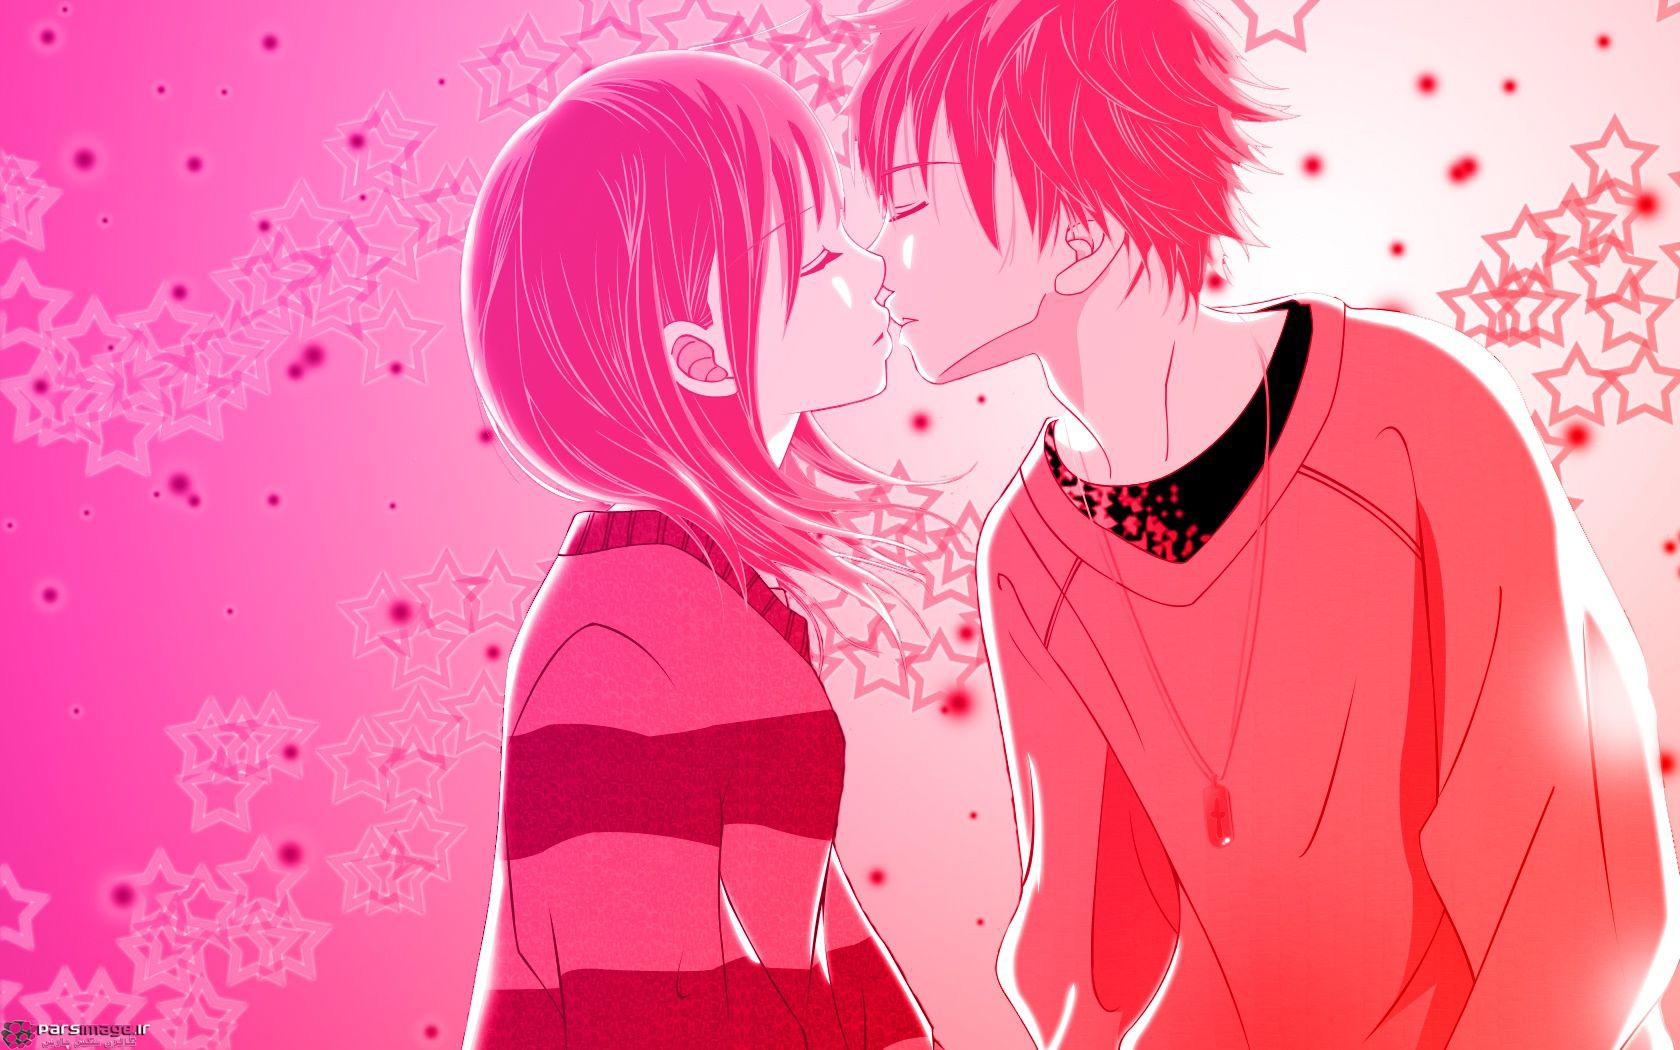 Happy Valentines Day Anime Couple Love HD Wallpaper  StylishHDWallpapers   a photo on Flickriver